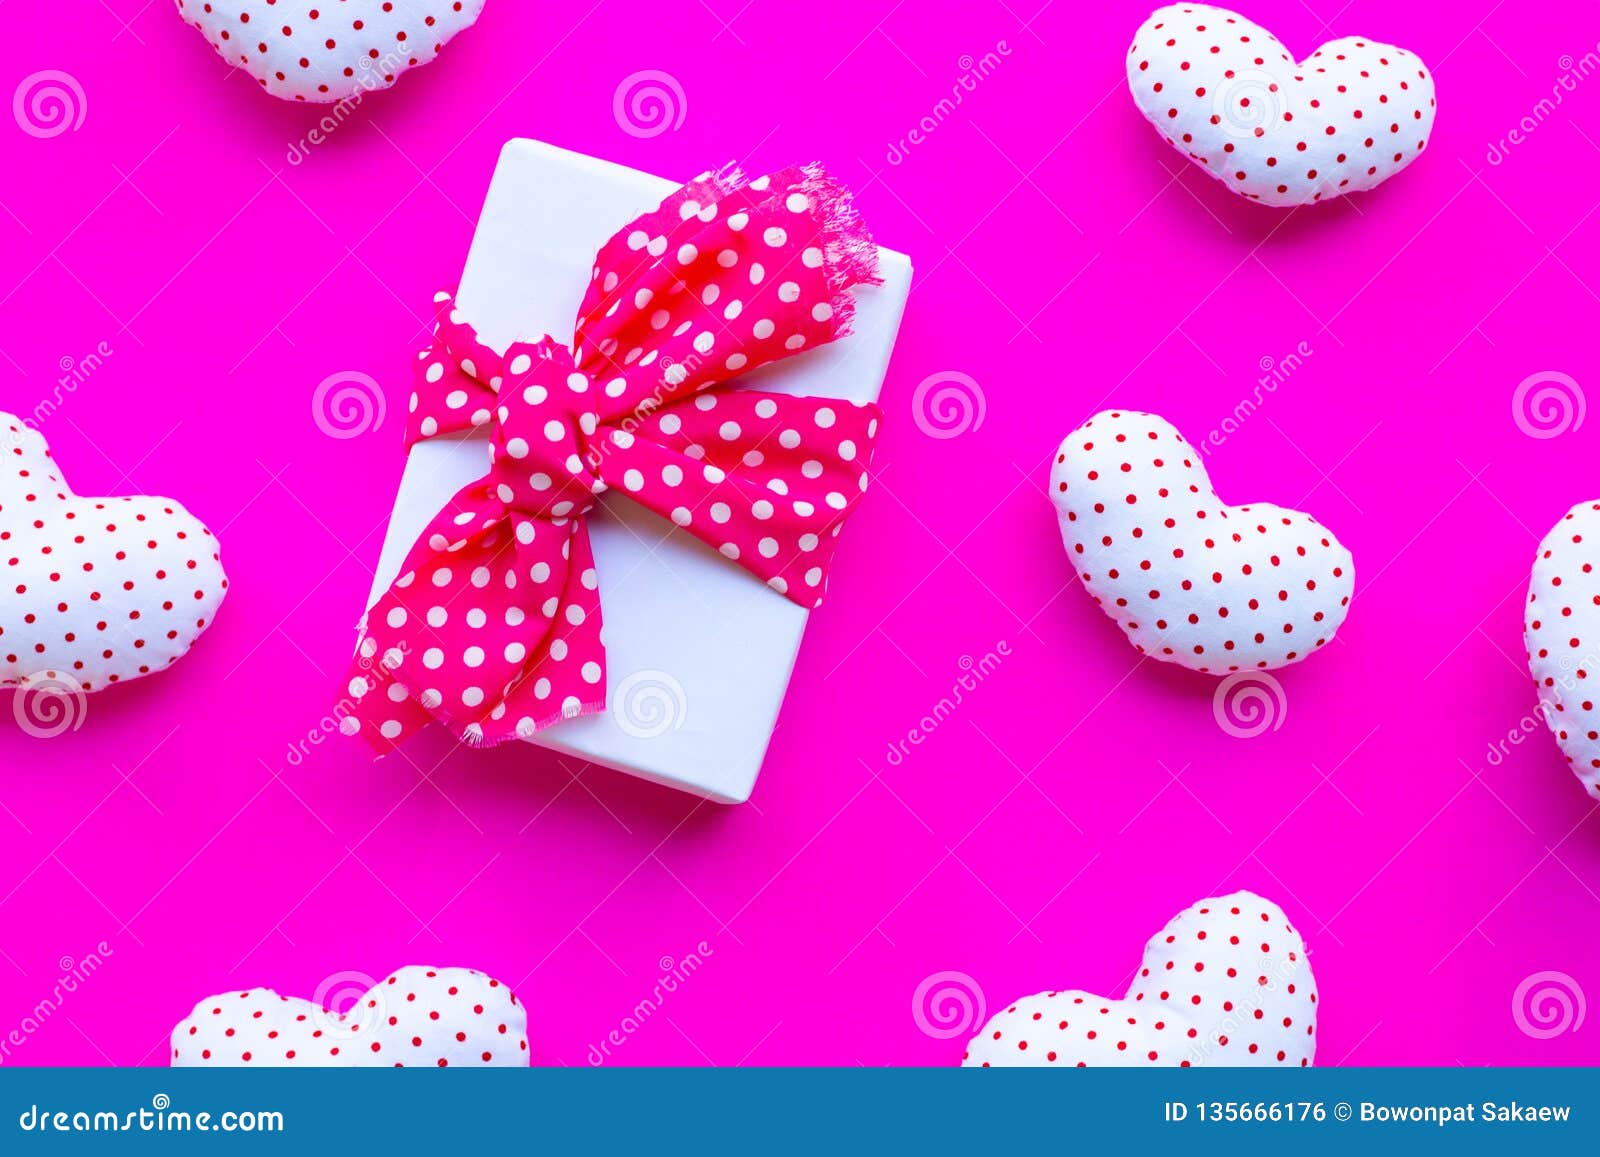 Gift Box with Valentine S Hearts on Pink Background Stock Photo - Image ...